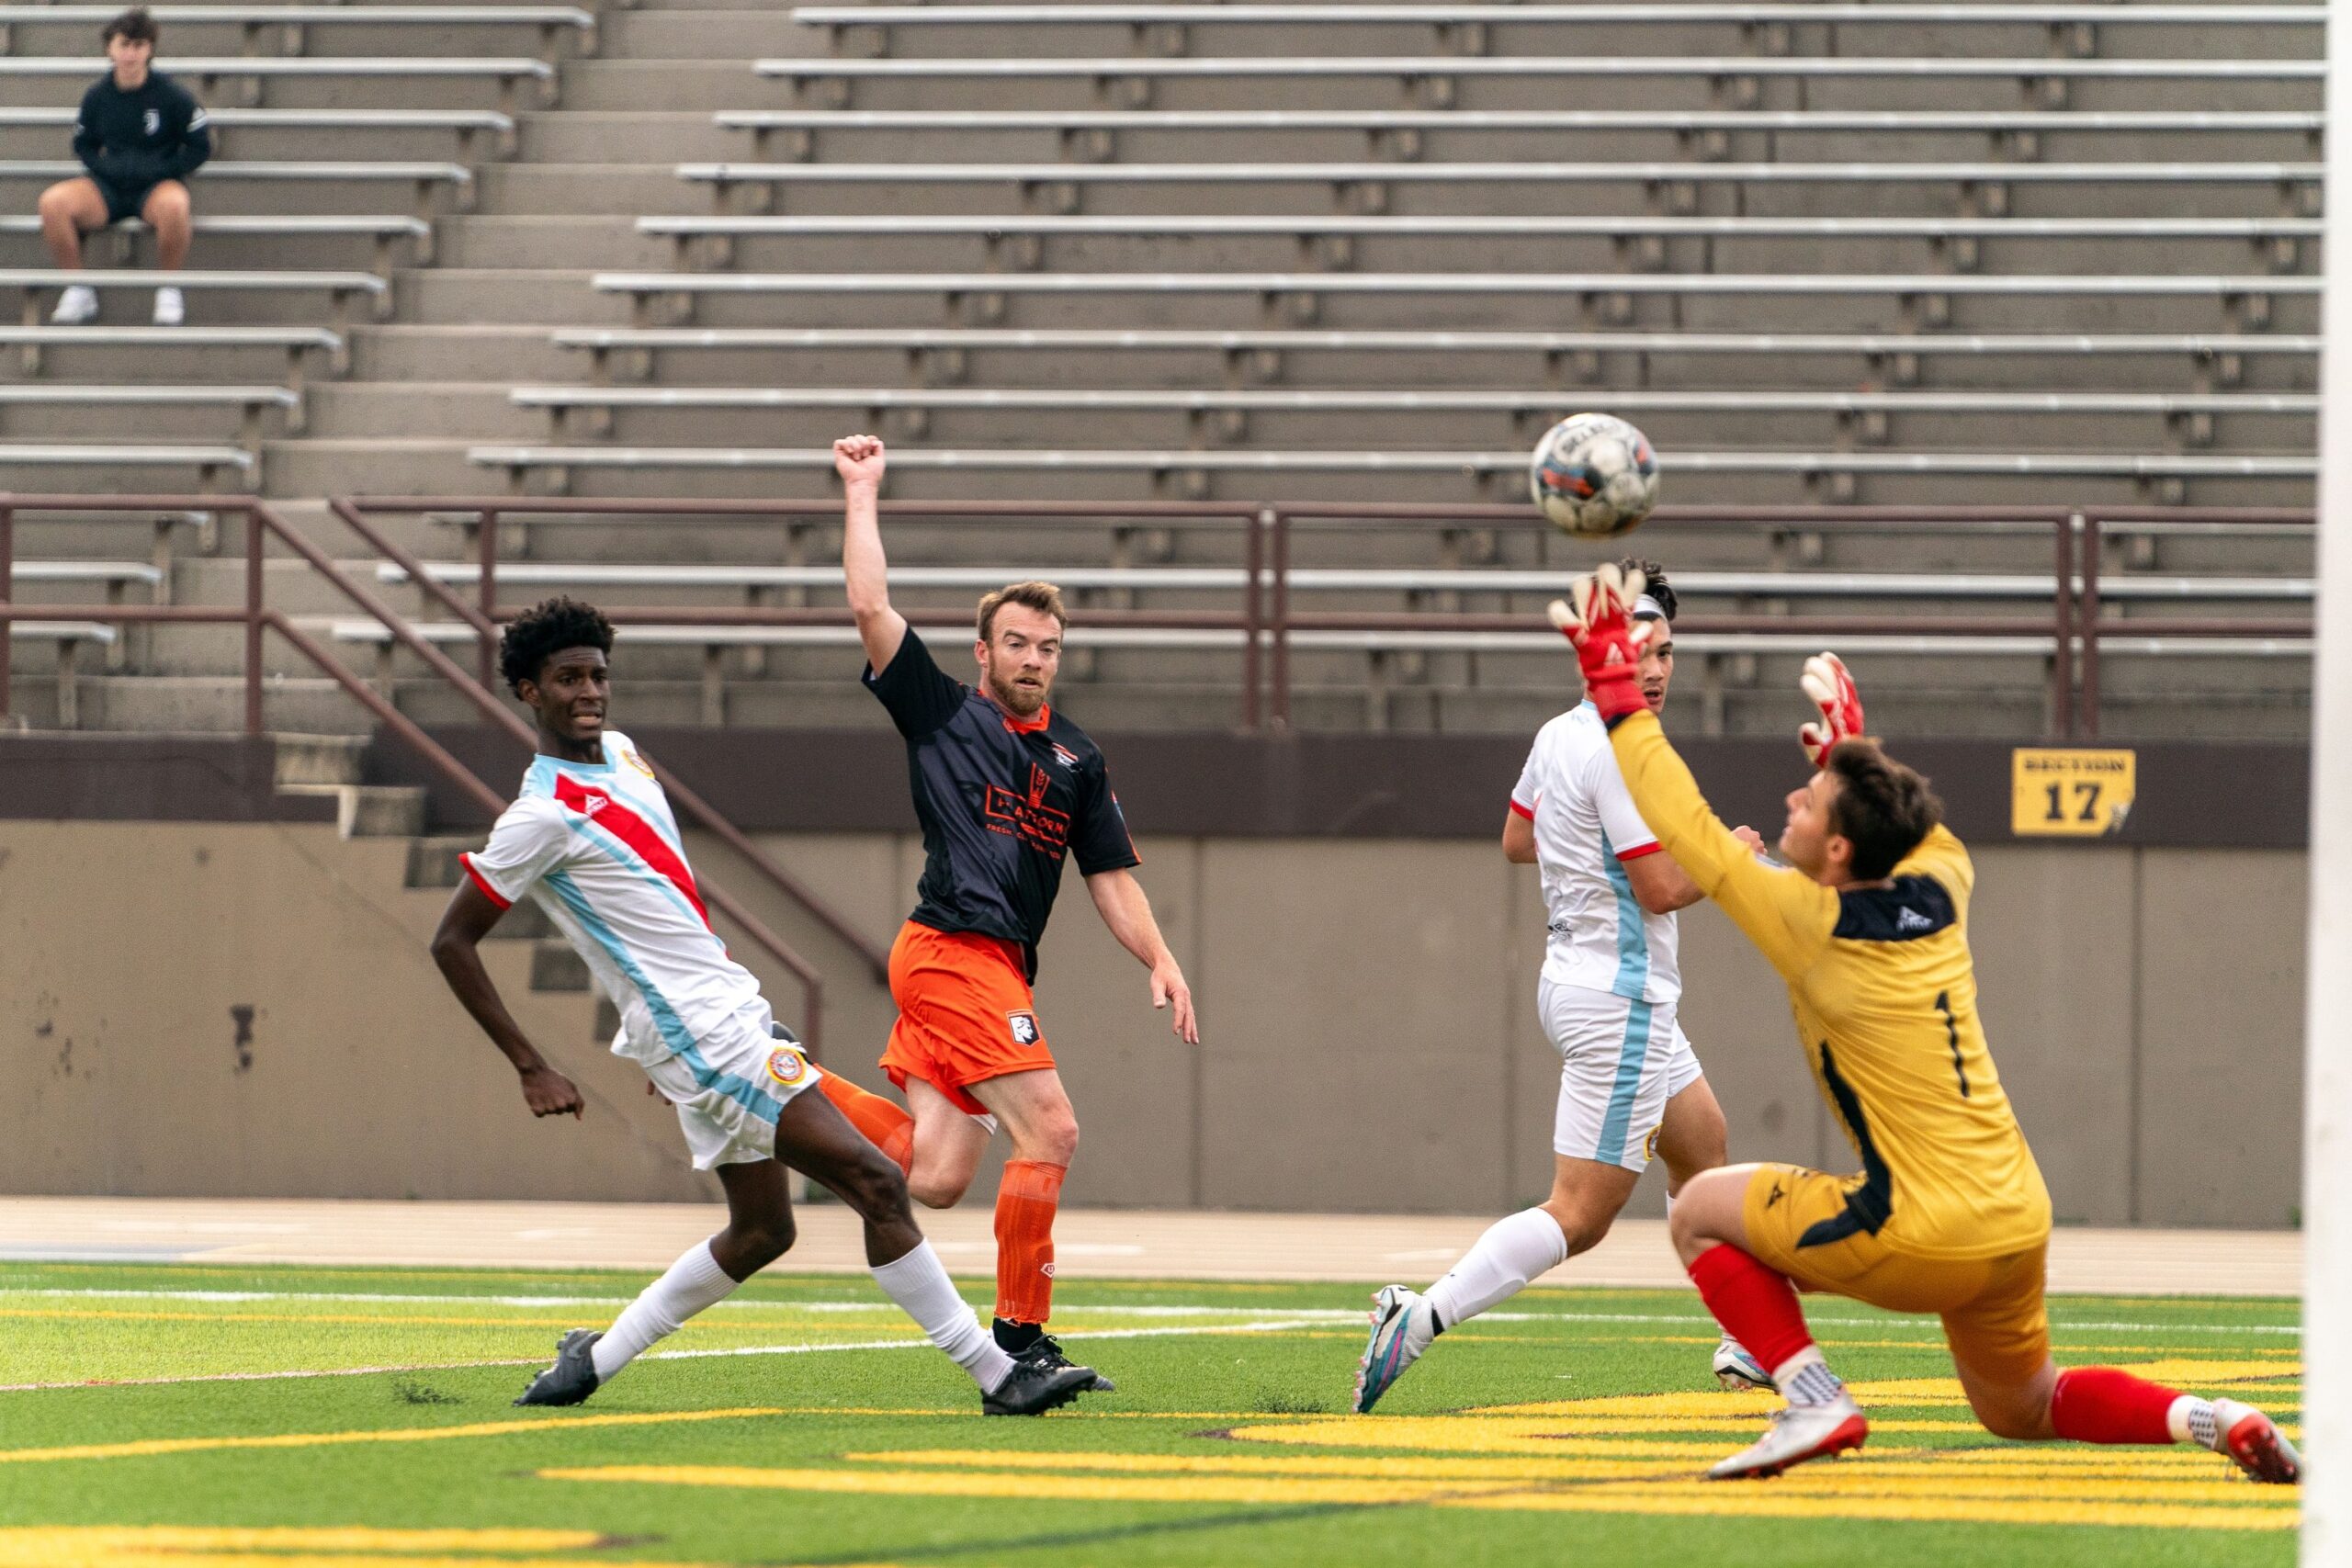 Four soccer players are depicted. Left hand side, player in a white jersey sliding in, player in center in a black jersey and orange shorts with his arm aloft, partially obscured player in white jersey and a goalkeeper on the right side, diving towards the ball